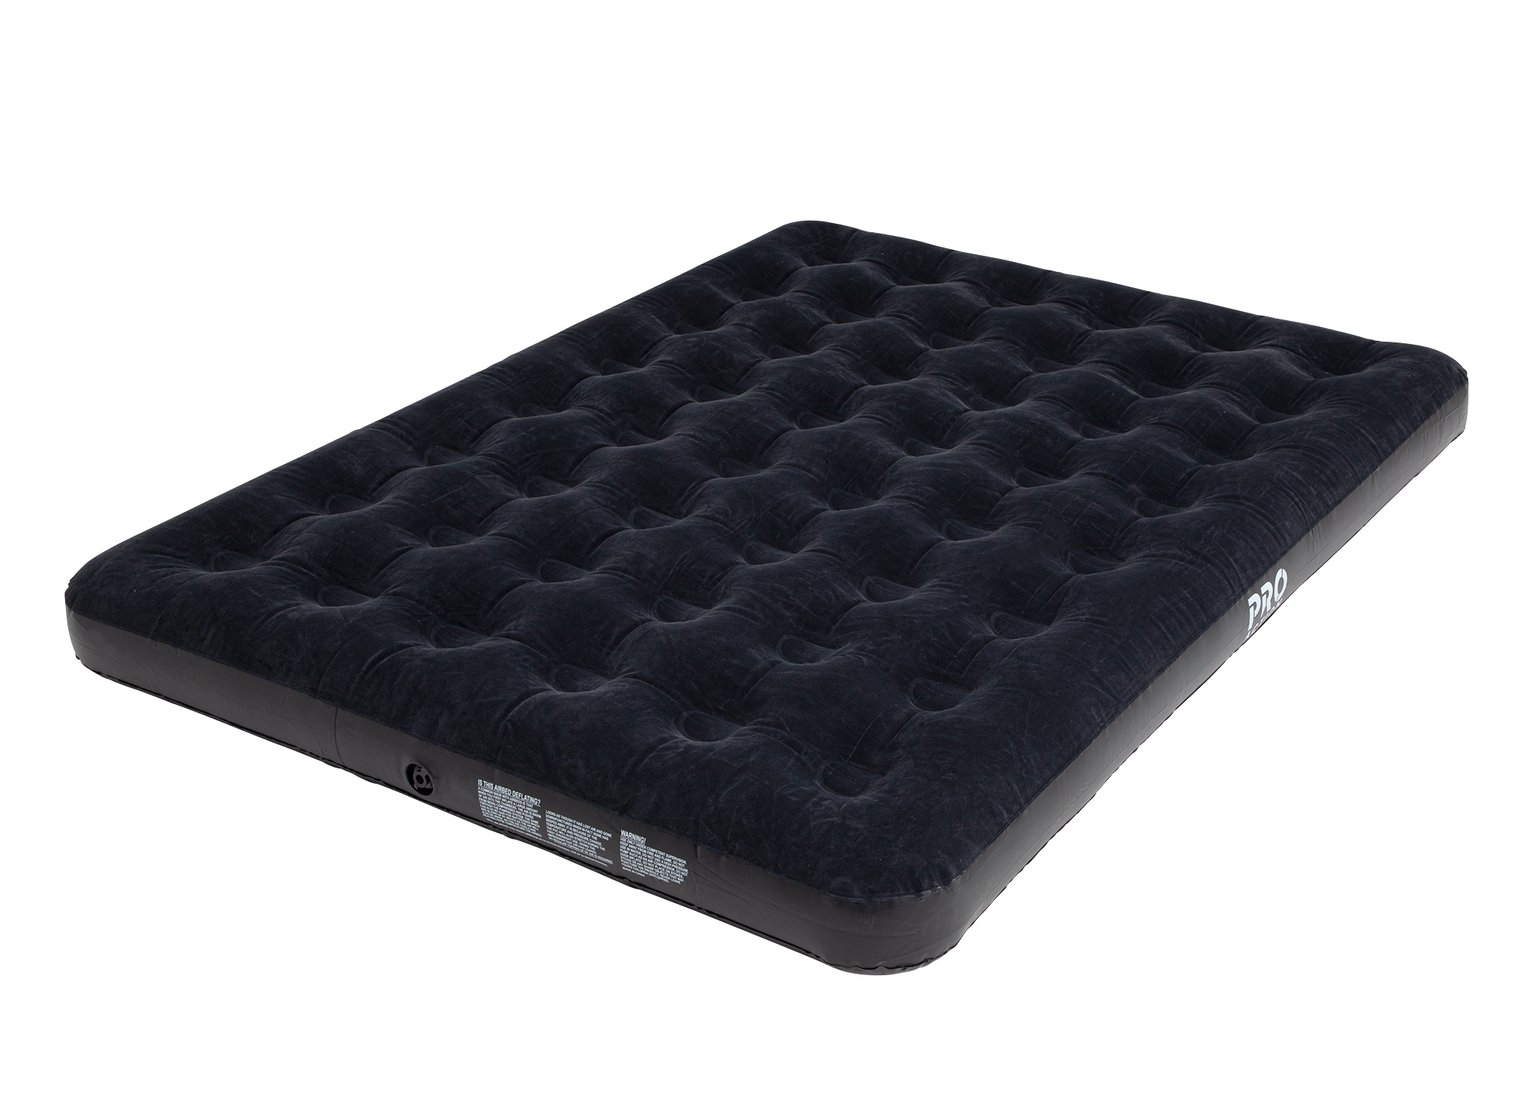 Pro Action Kingsize Flocked Air Bed